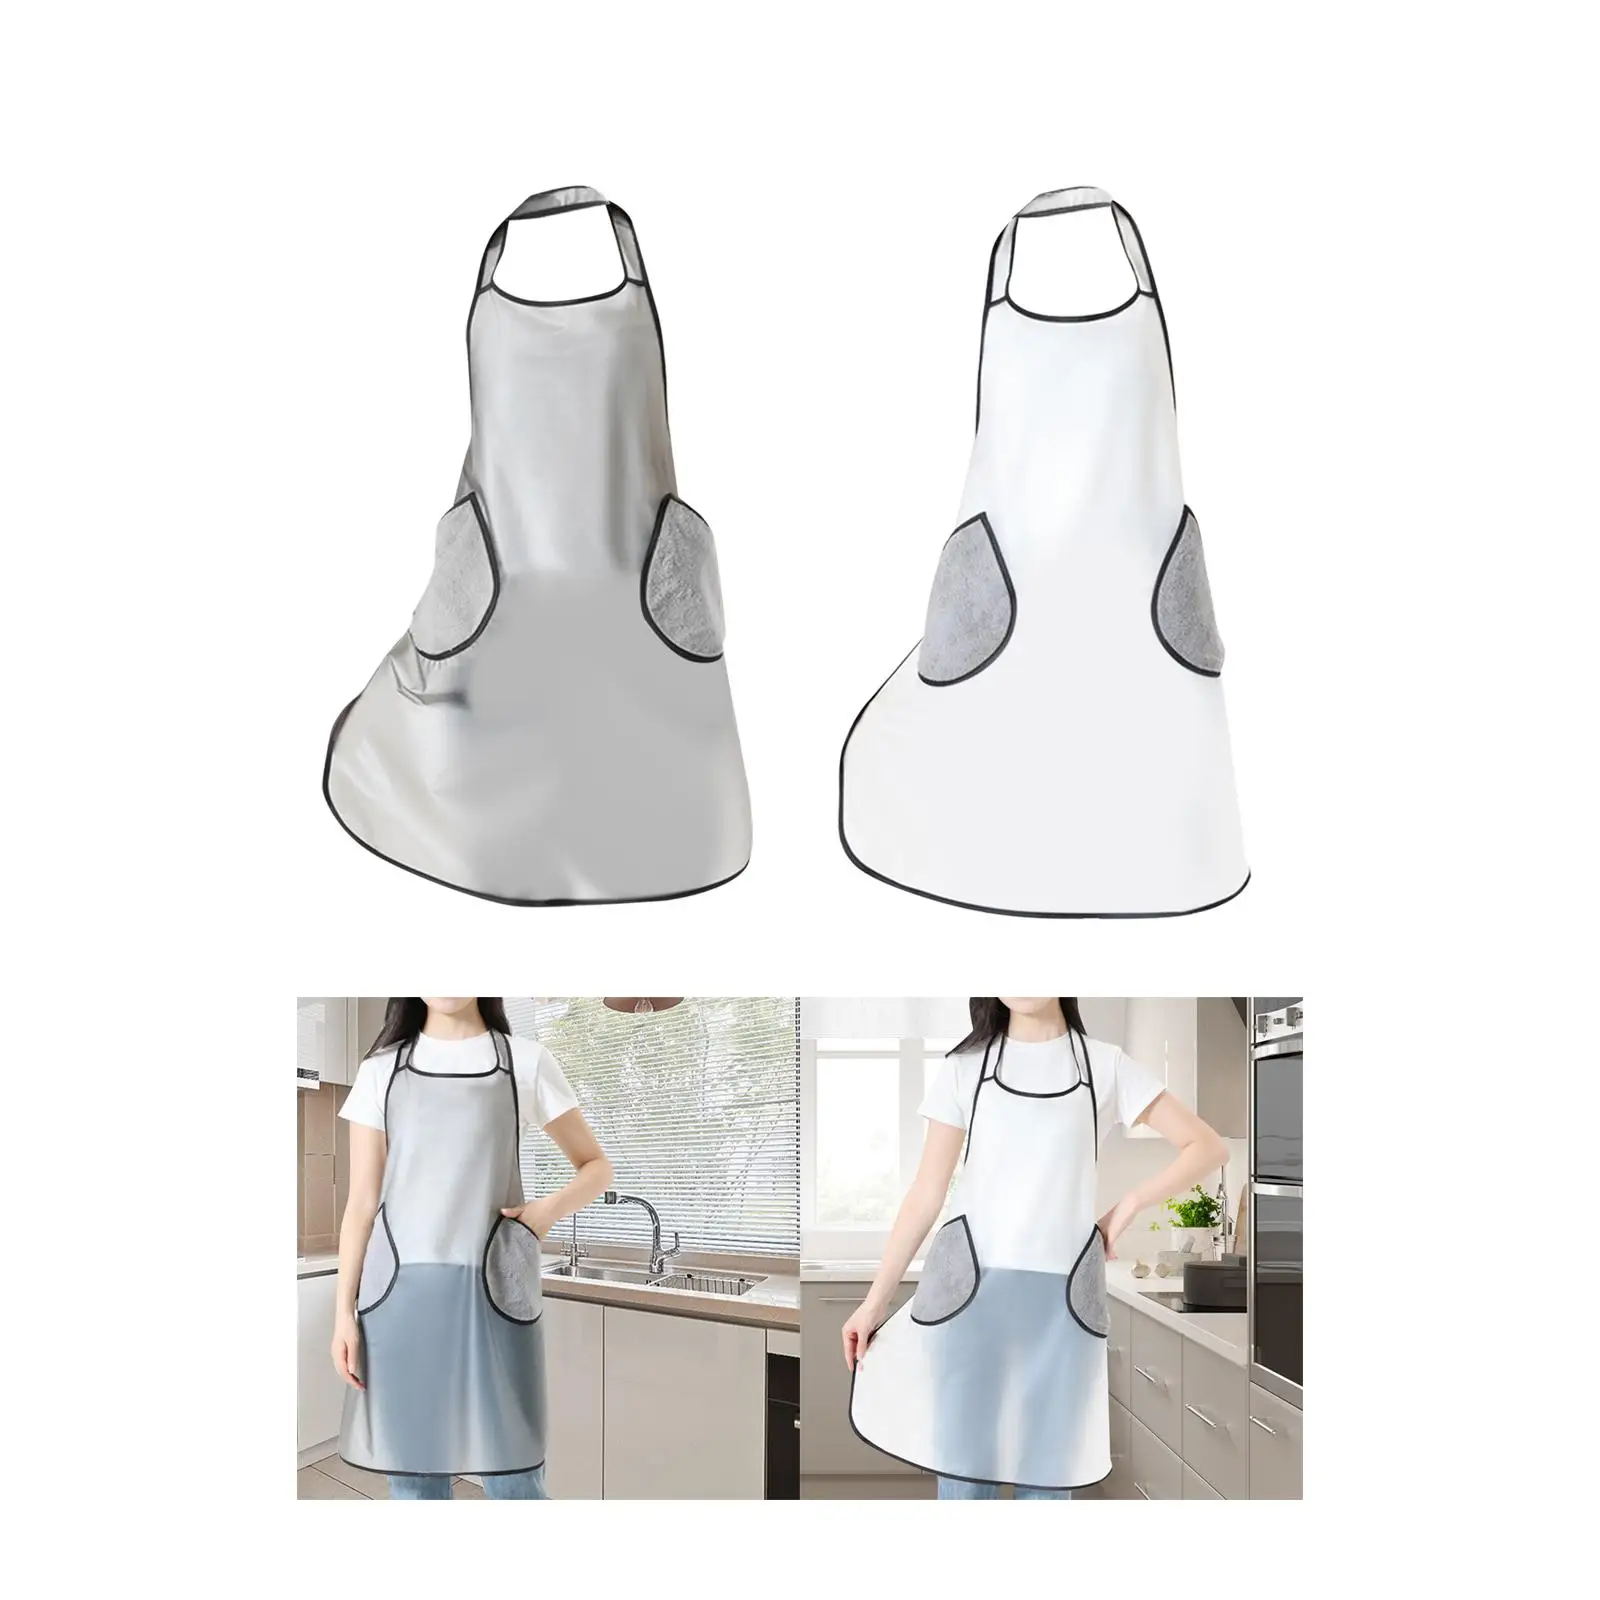 Chef Apron Cooking Apron with Hand Wipe Pockets Lightweight for Restaurant, Salon Length 70cm, Width 60cm Oil Proof BBQ Apron